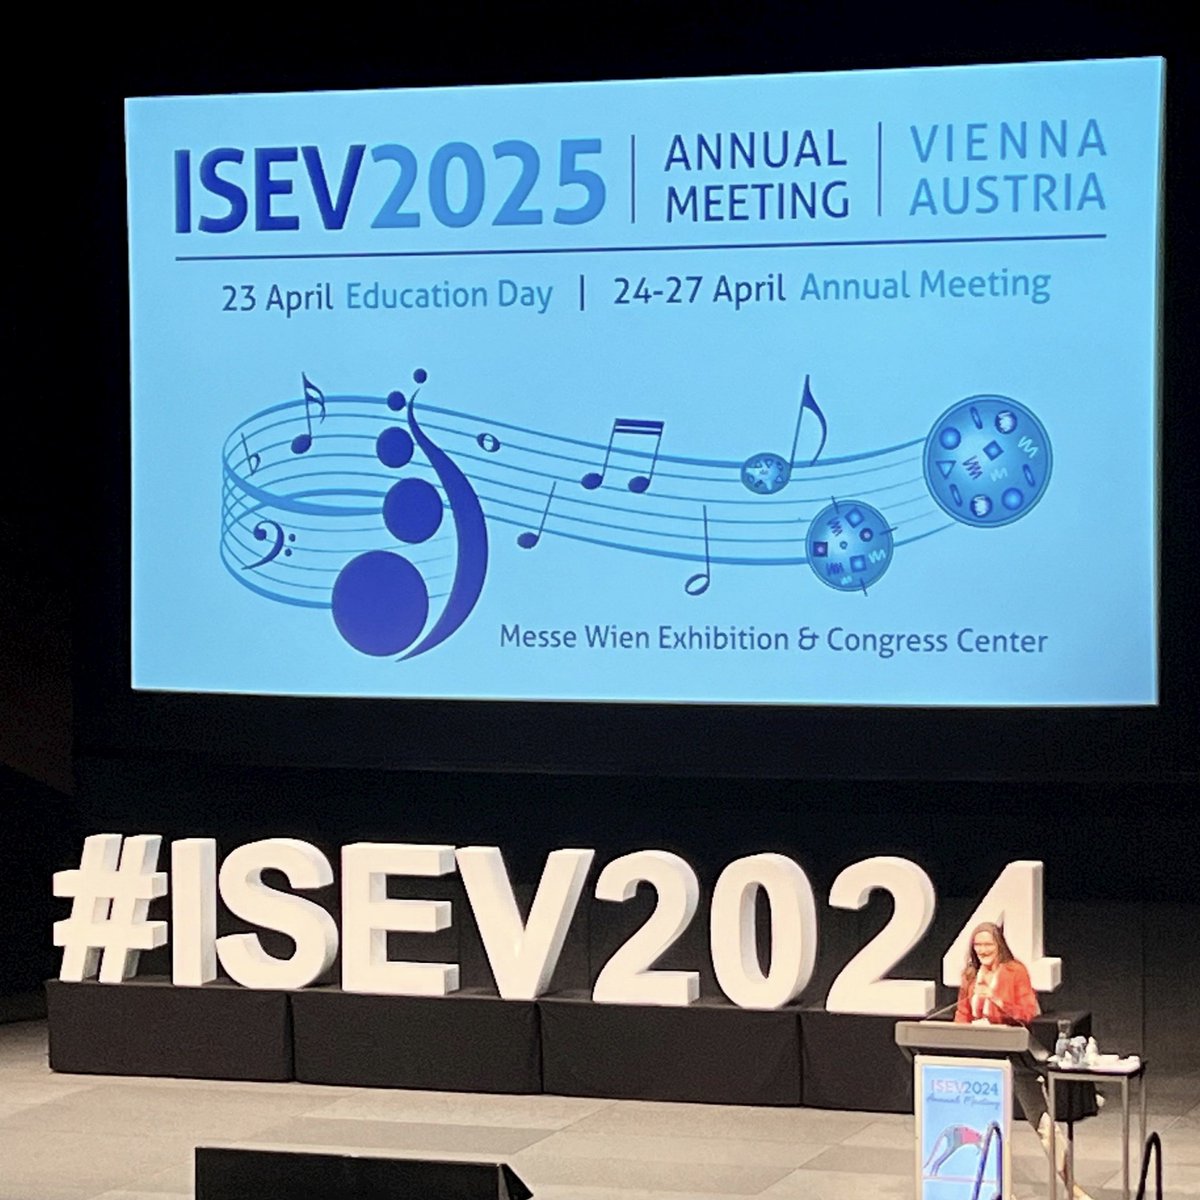 Highlights from ISEV 2024 in Melbourne, where our board member Andrea Galisova presented CzeSEV. We can´t wait for ISEV 2025 in Vienna! More photos and information from ISEV 2024 on our website sci.muni.cz/czesev/events

#science #isev #researchers #extracellularvesicles #czesev